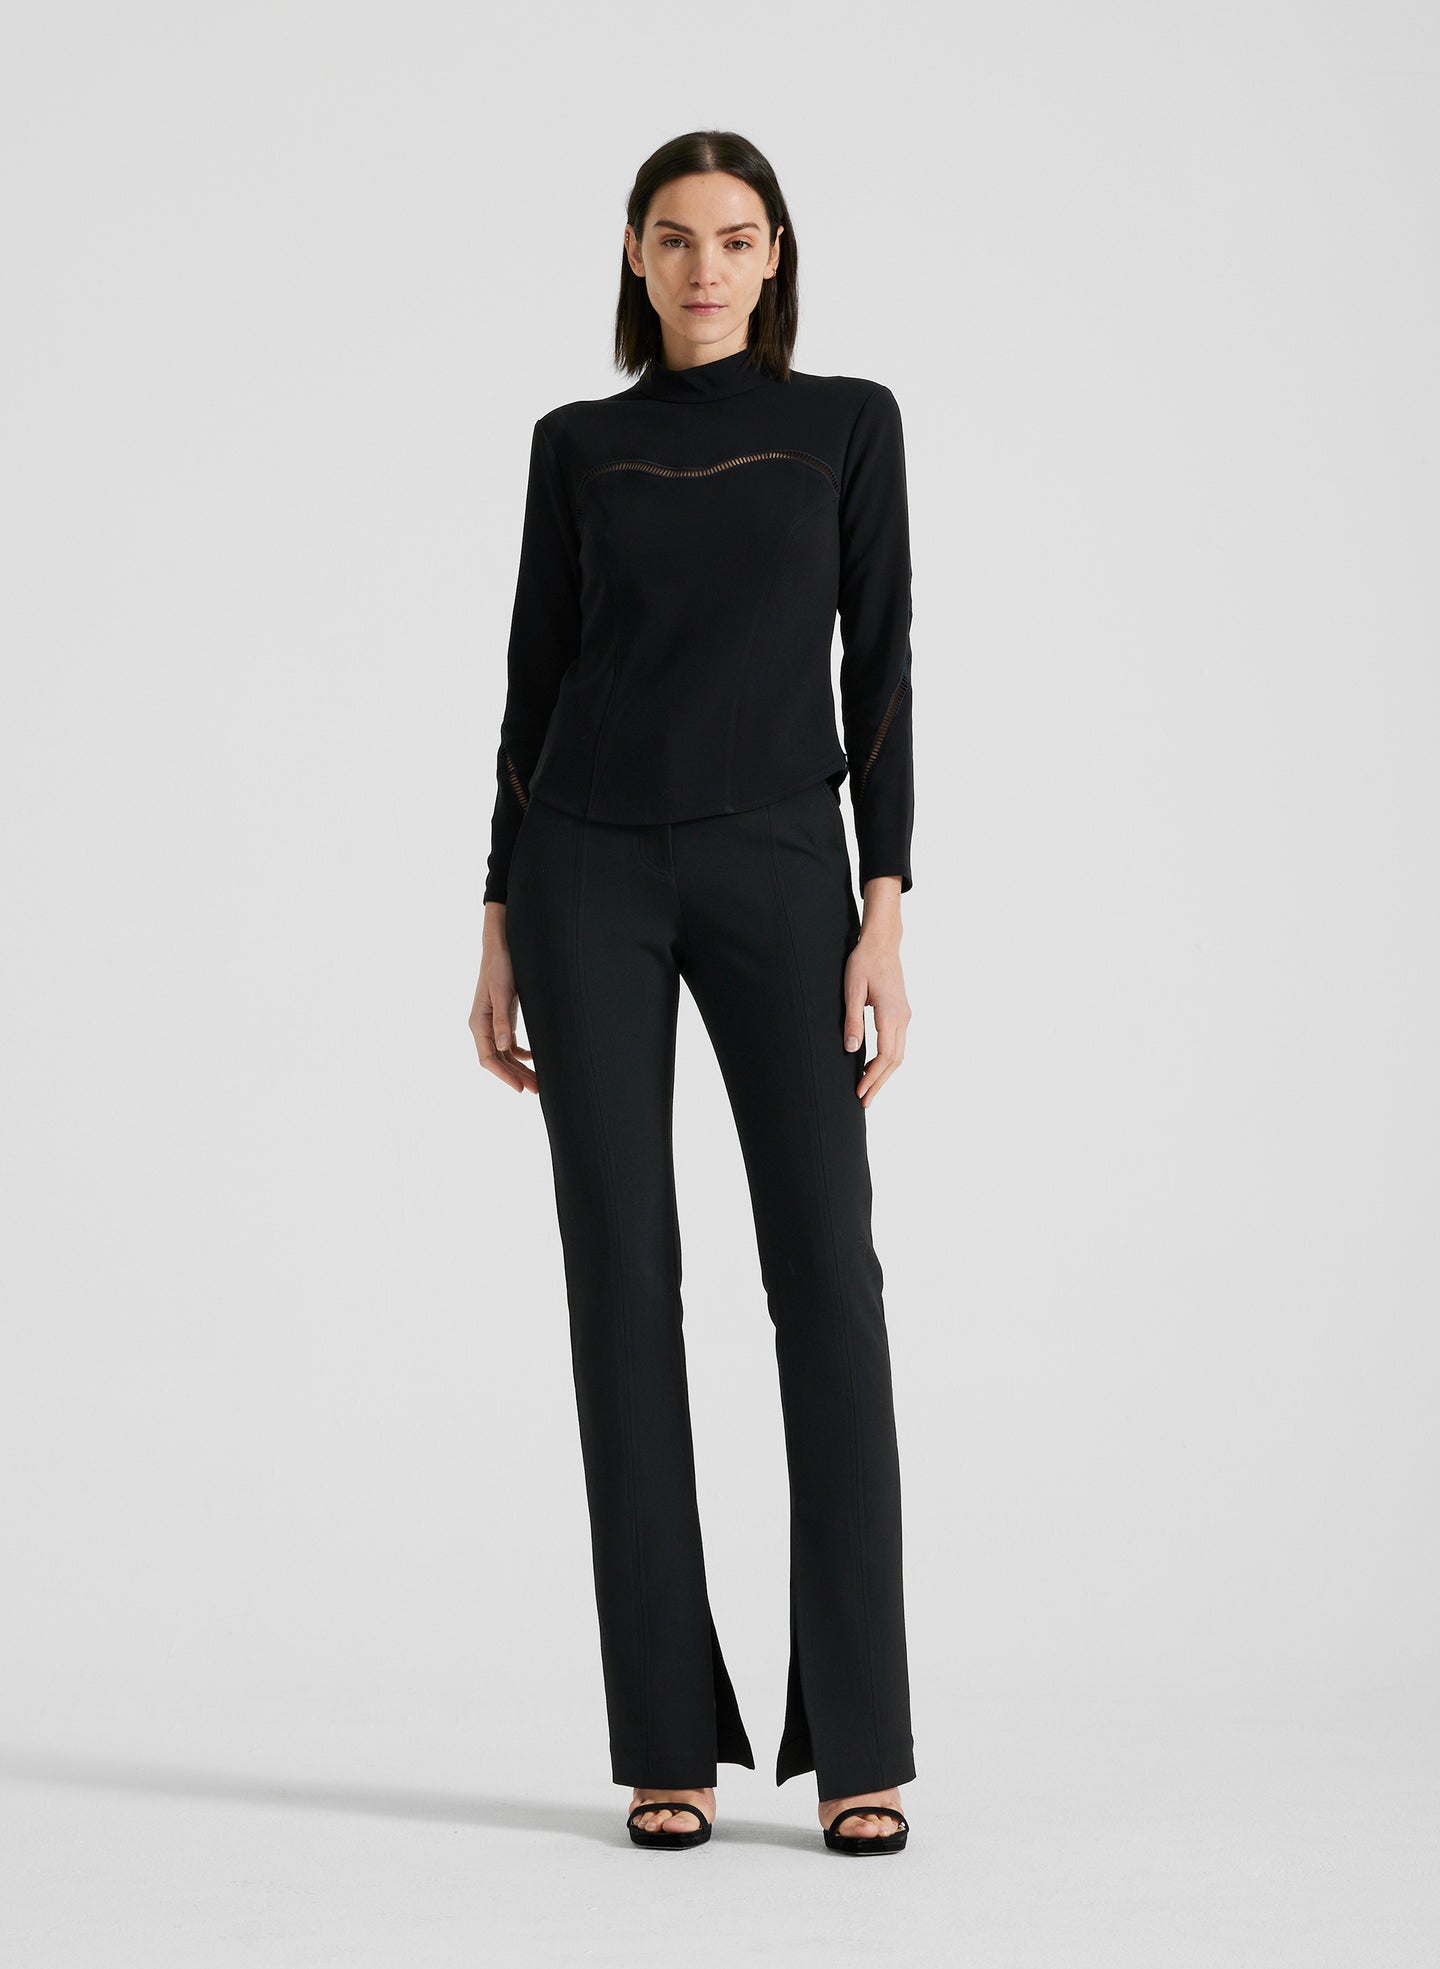 front view of woman wearing black long sleeve shirt and black pants